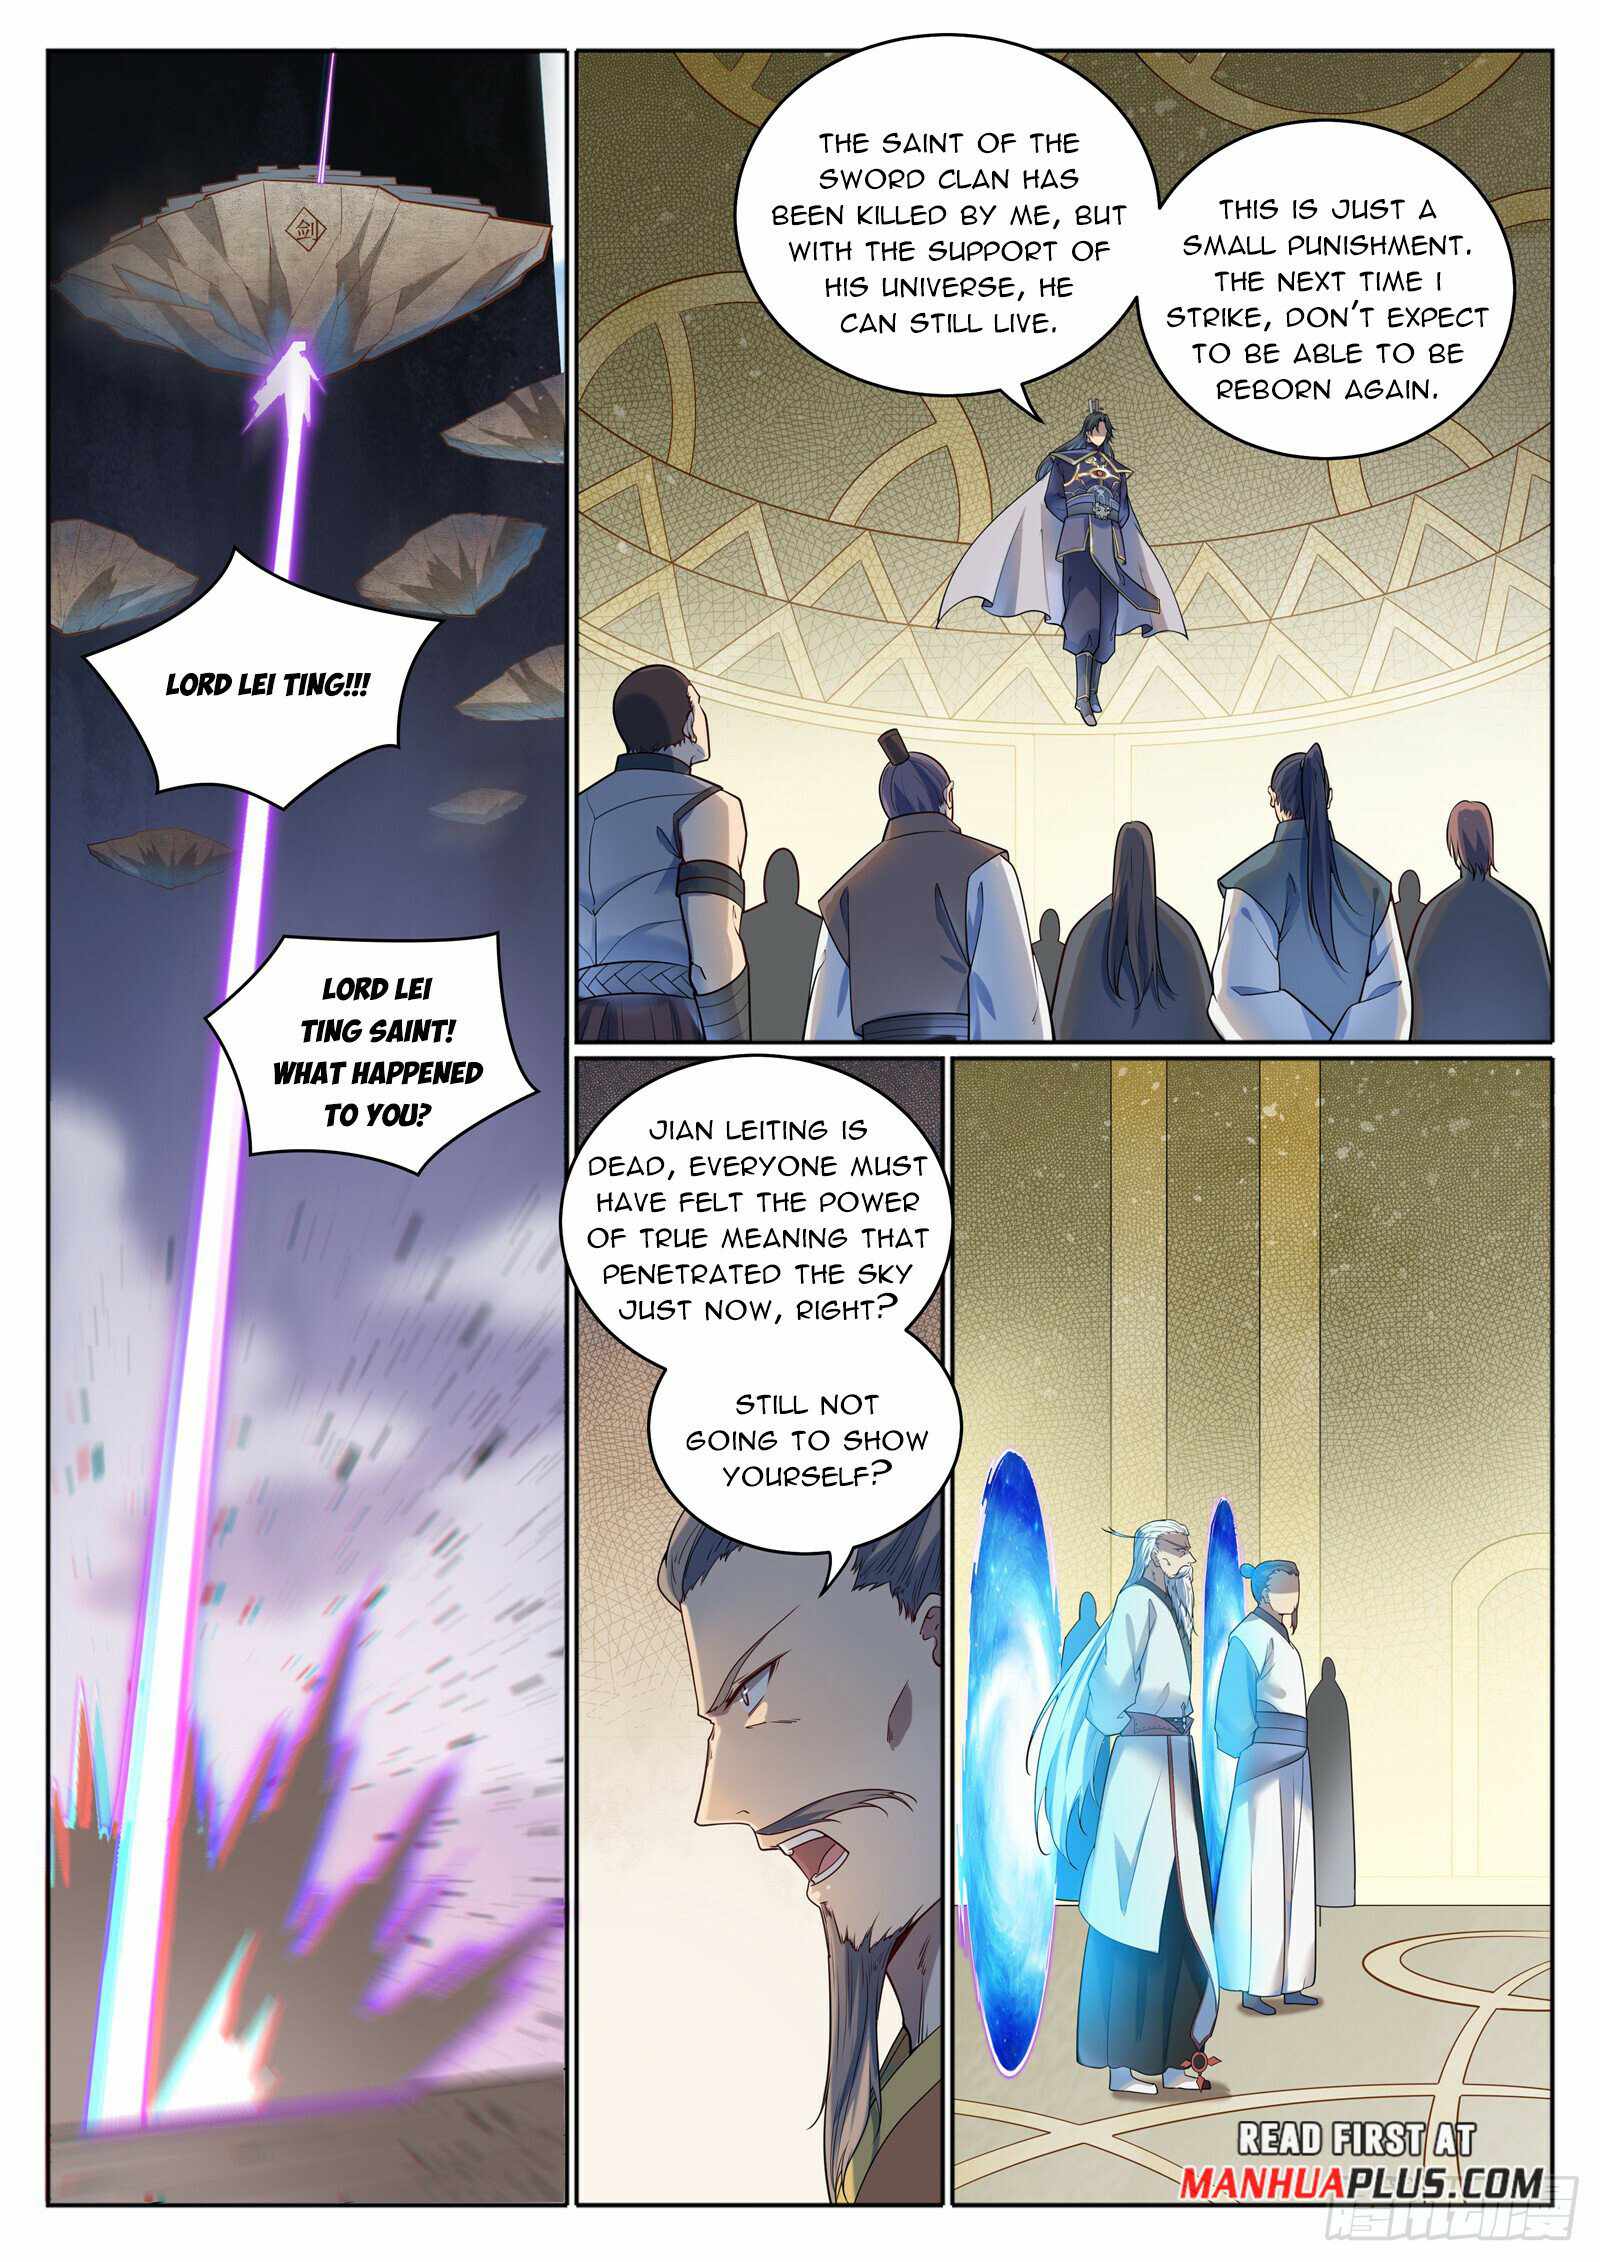 APOTHEOSIS Chapter 1087 - Page 2